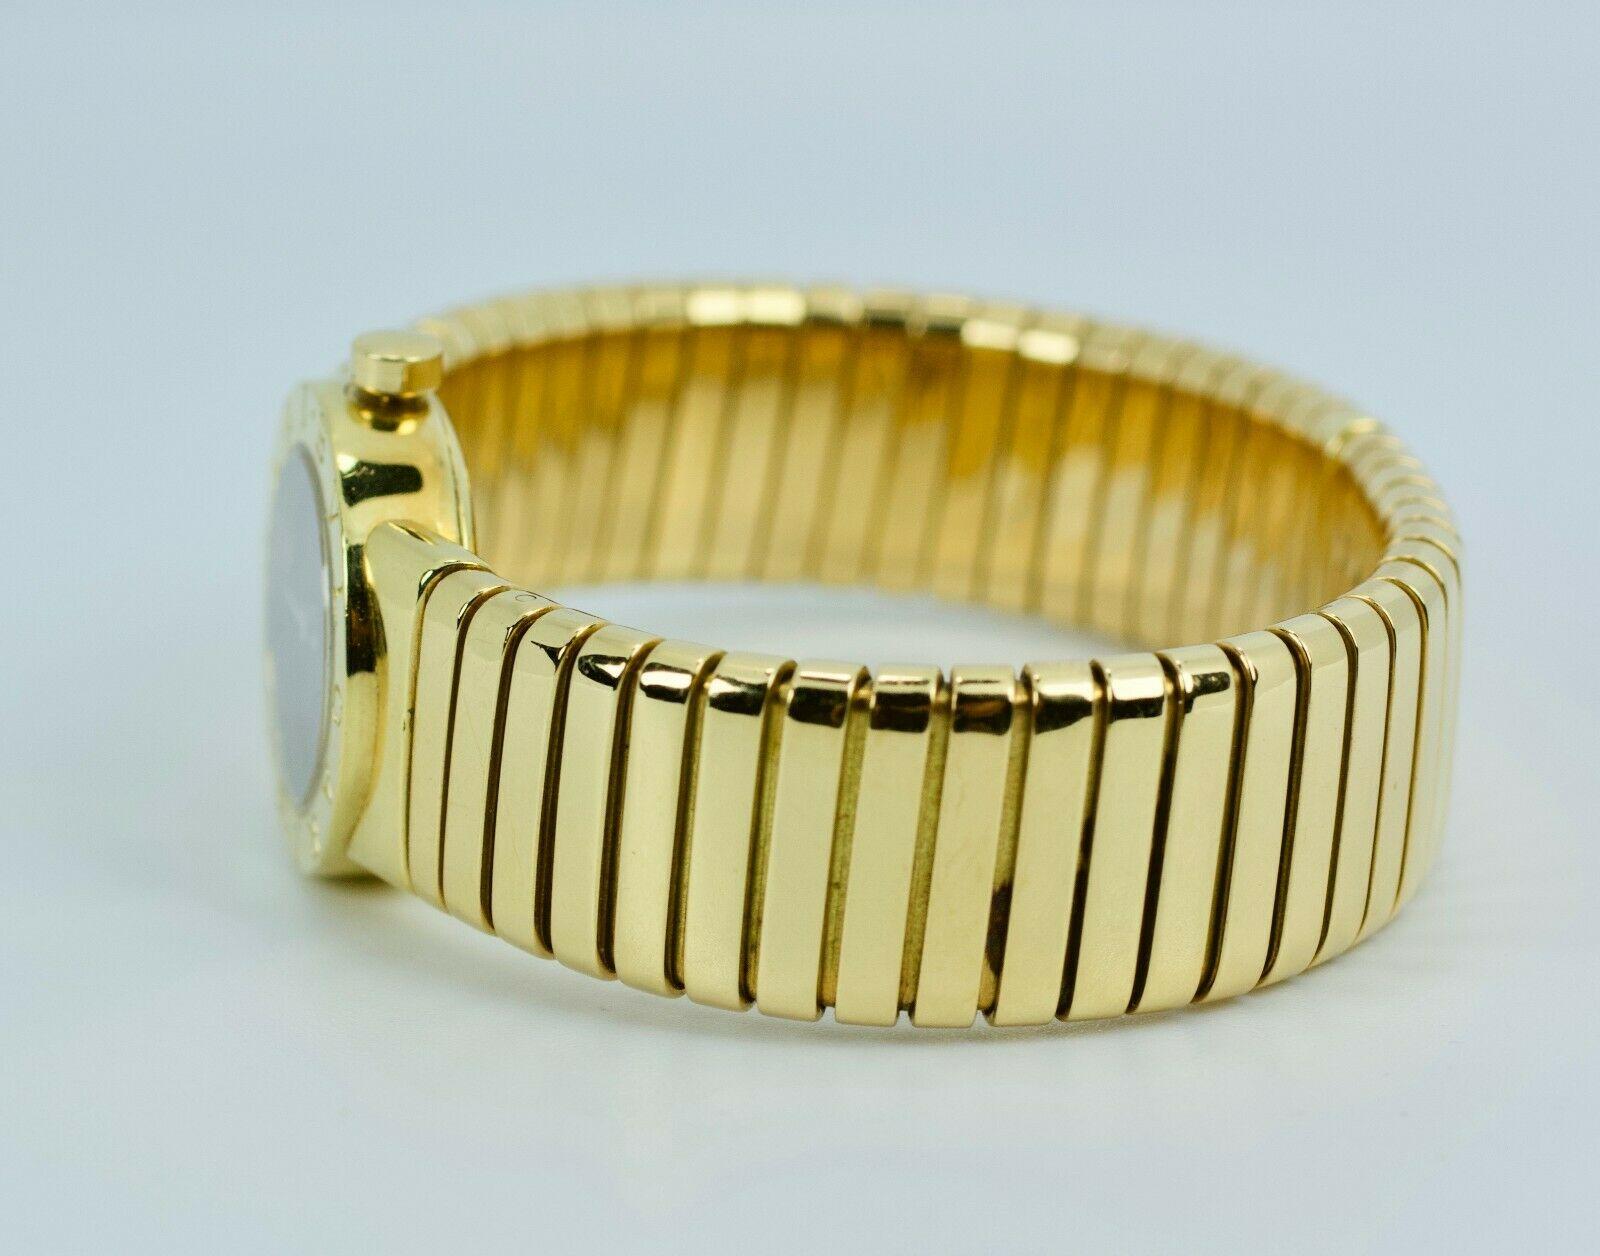 Bvlgari Tubogas 18k Yellow Gold Flexible Watch with Box and Warranty Card In Good Condition In Montgomery, AL